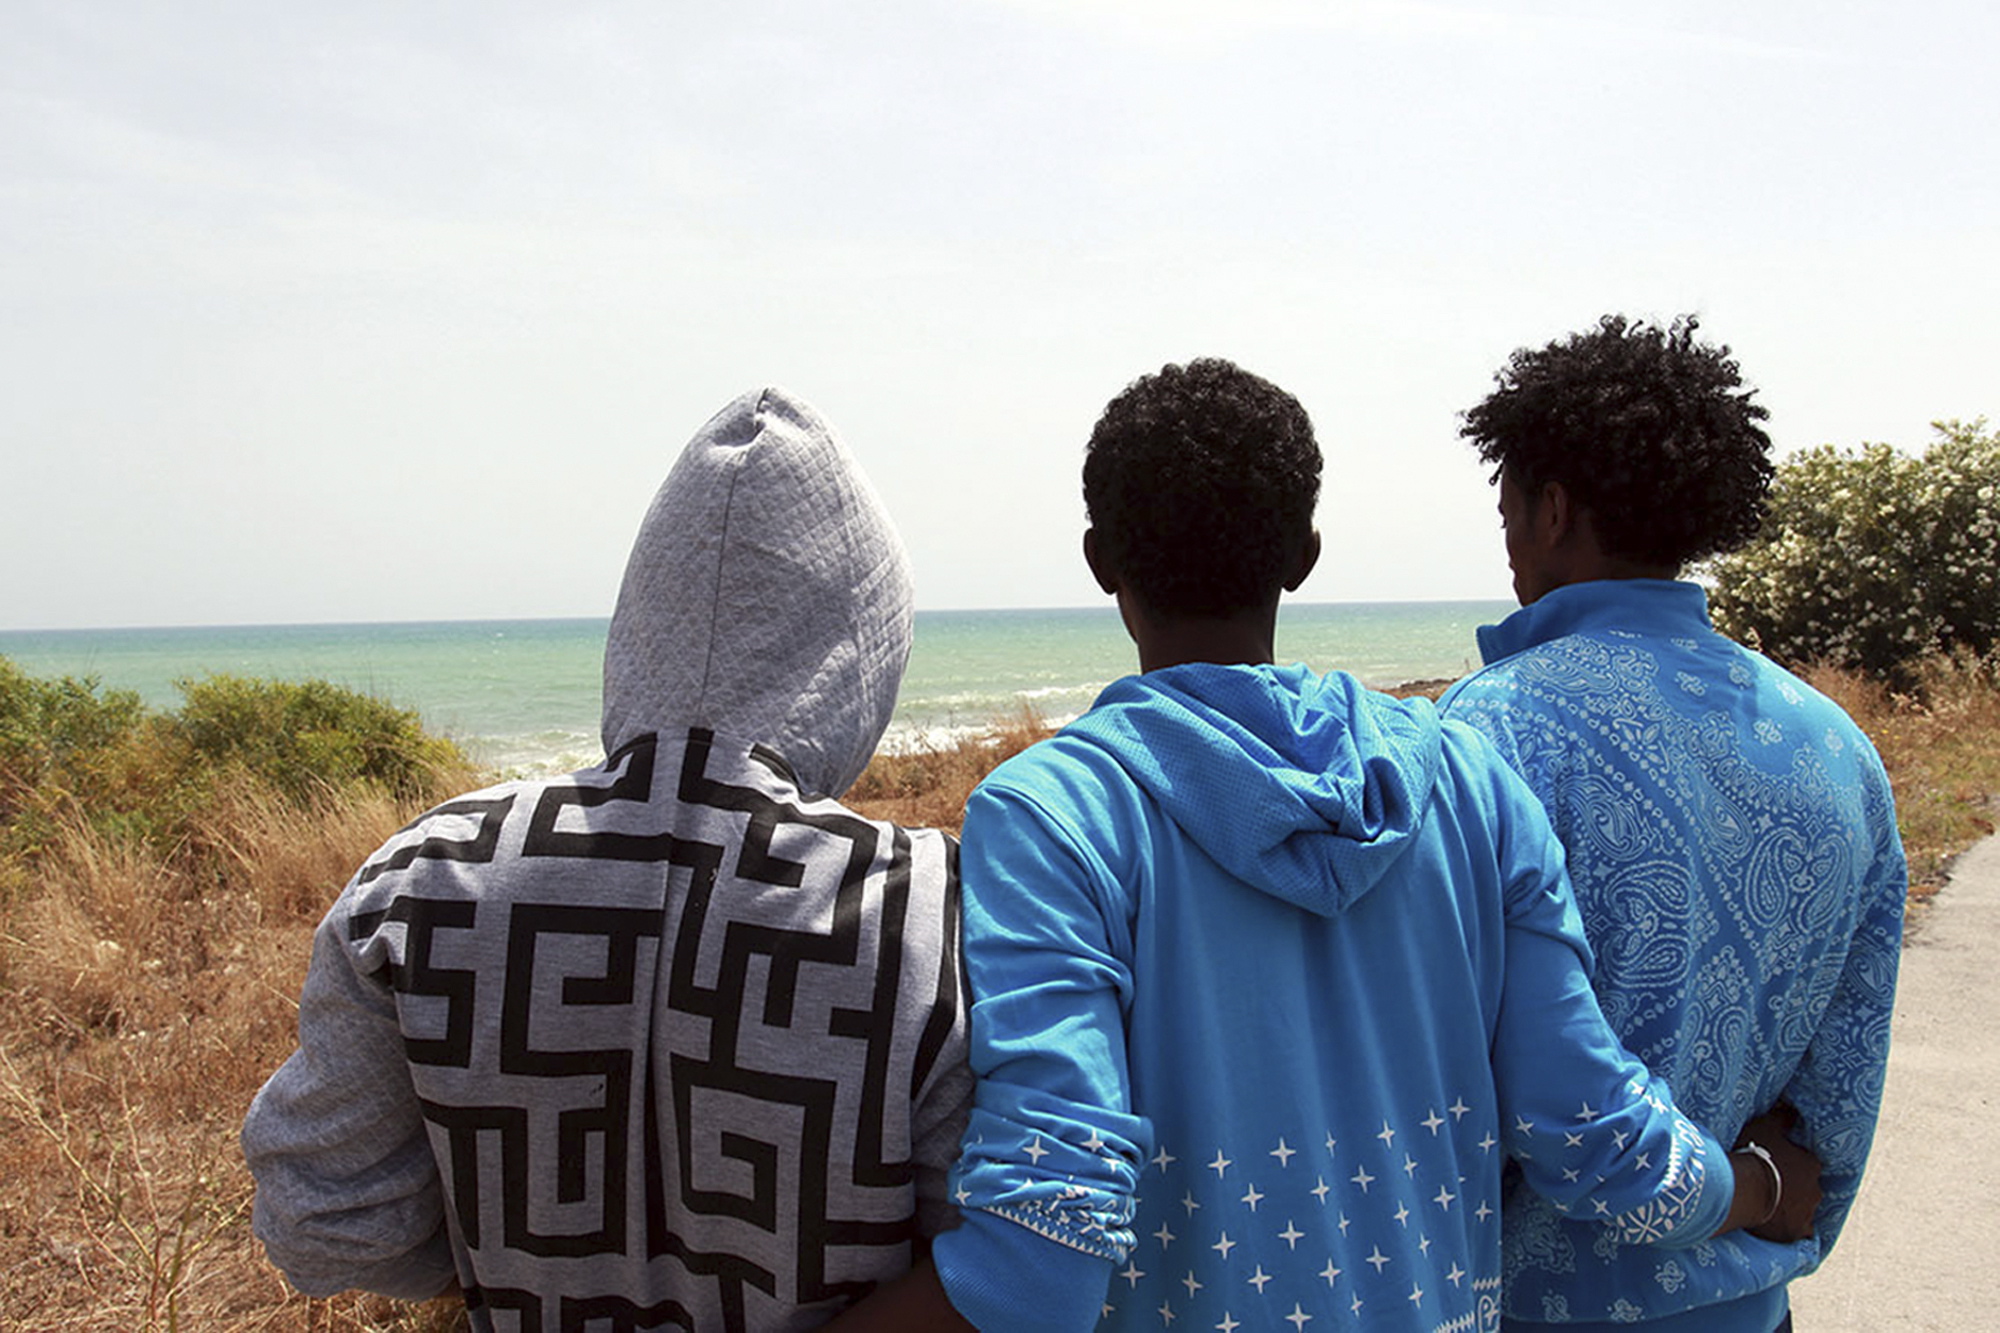 Filmon Selomon, right, Mabtom Tekle, center, and Awad Weldemariam look at the sea during an interview with the Associated Press, in Pozzallo, Sicily, Italy, Sunday, May 29, 2016. They are three Eritrean survivors of an accident that might have produced the largest number of missing and presumed dead, when a wooden fishing boat being towed by another smugglers boat from the Libyan port of Sabratha, sank Thursday. Estimates by police and humanitarian organizations range from around 400 to about 550 missing in that sinking alone.